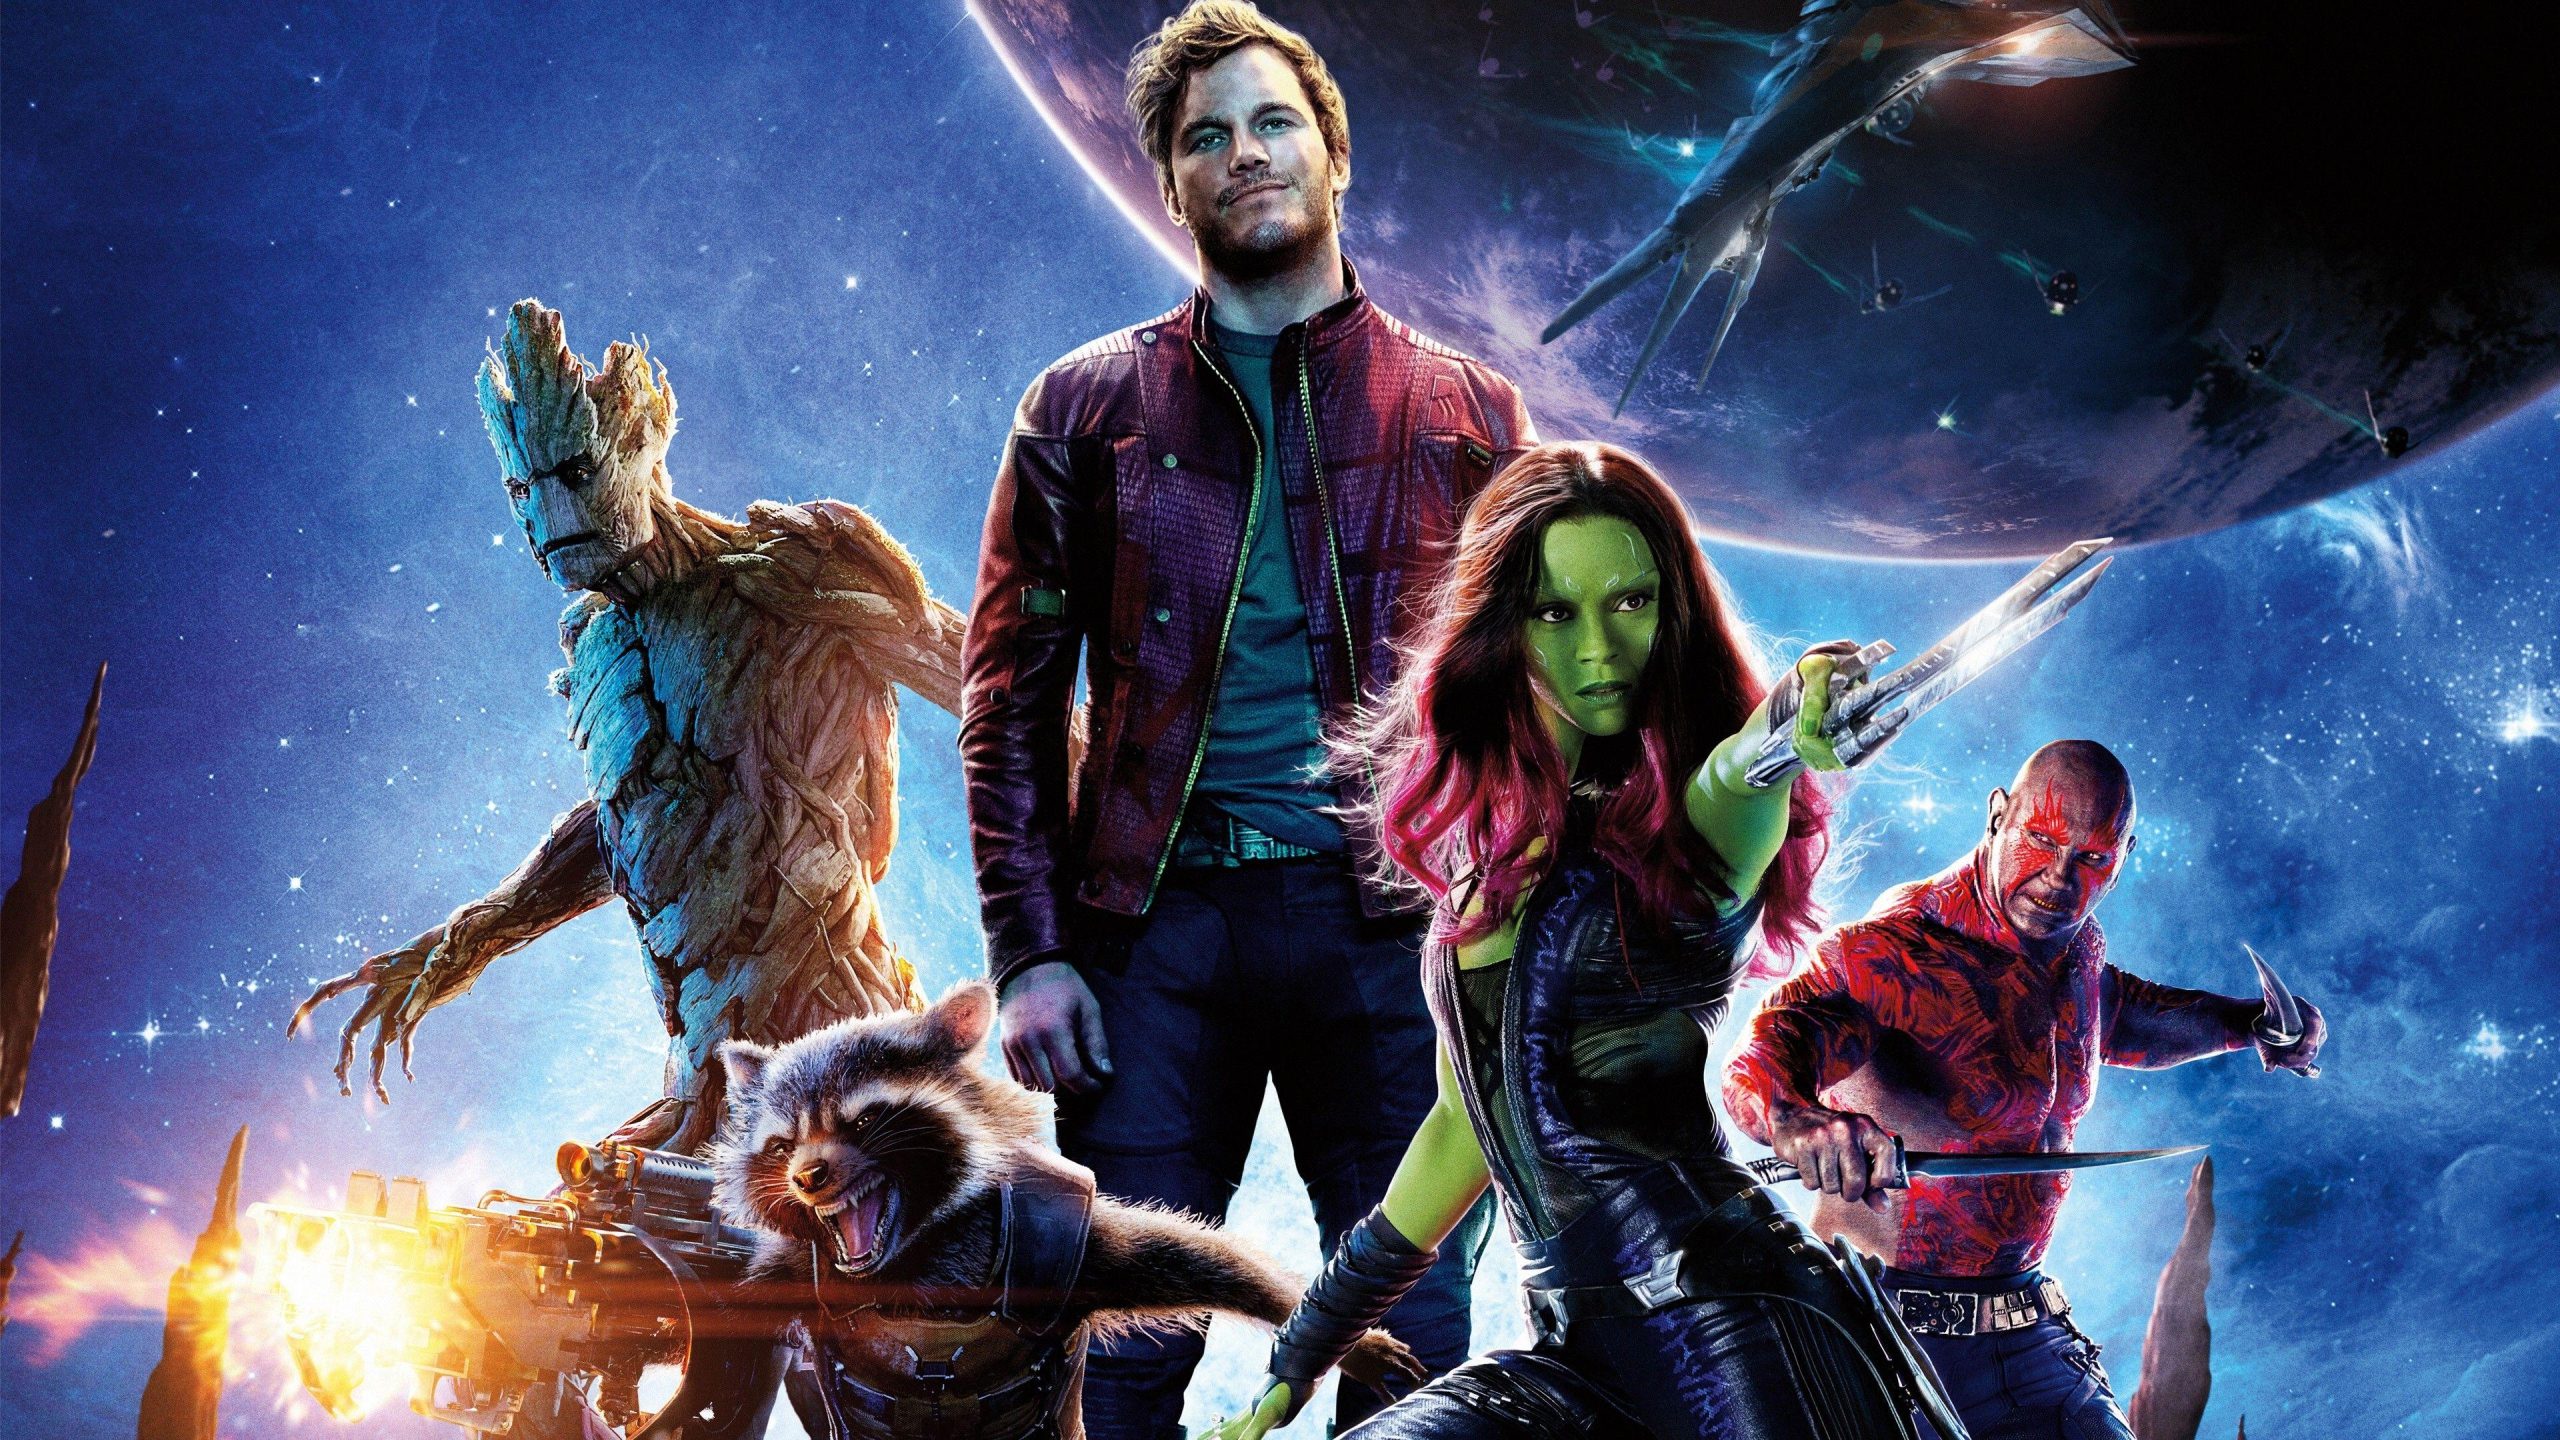 The Guardians Of The Galaxy 4k Hd Wallpaper, The Guardians Of The Galaxy 4k, Movies